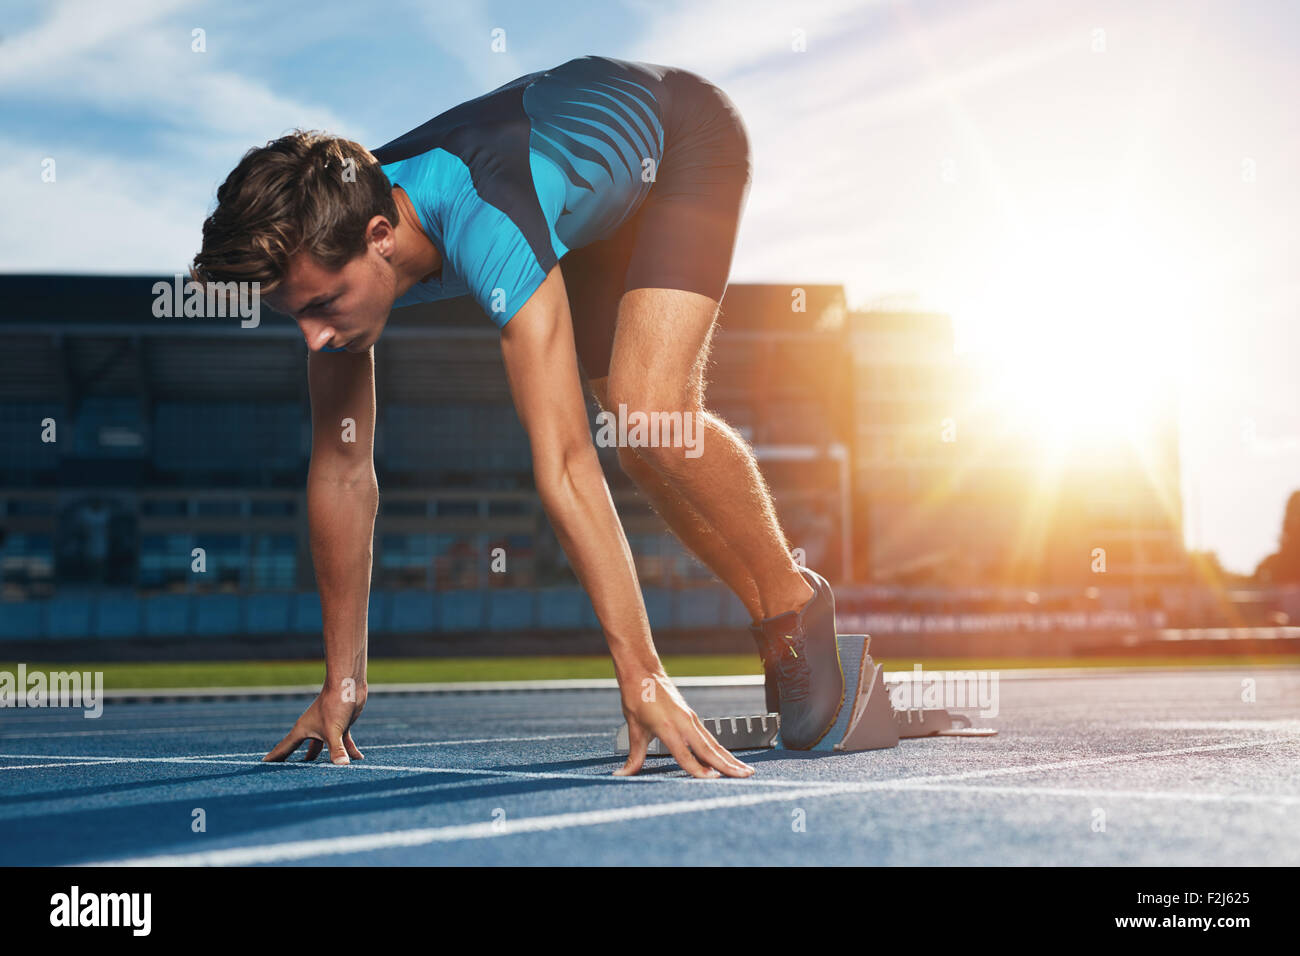 Athlete sprinter in starting position Stock Photo by ©santypan 552285178